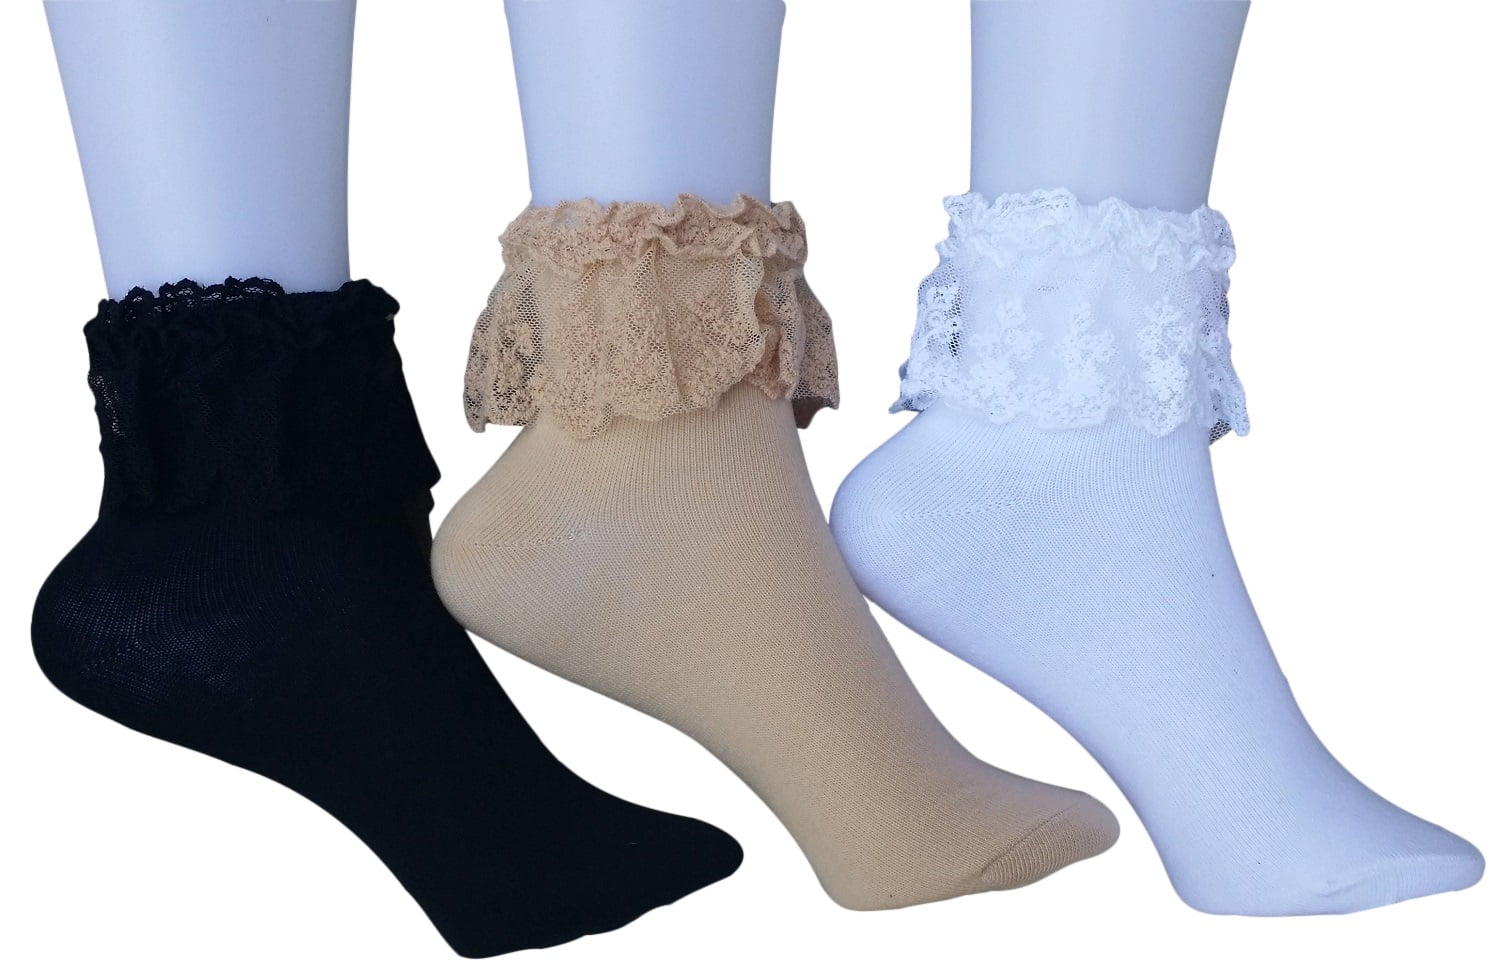 Womens Vintage Lace Ruffle Frilly Ankle Socks Ladies Fancy Dress Party Accessory 